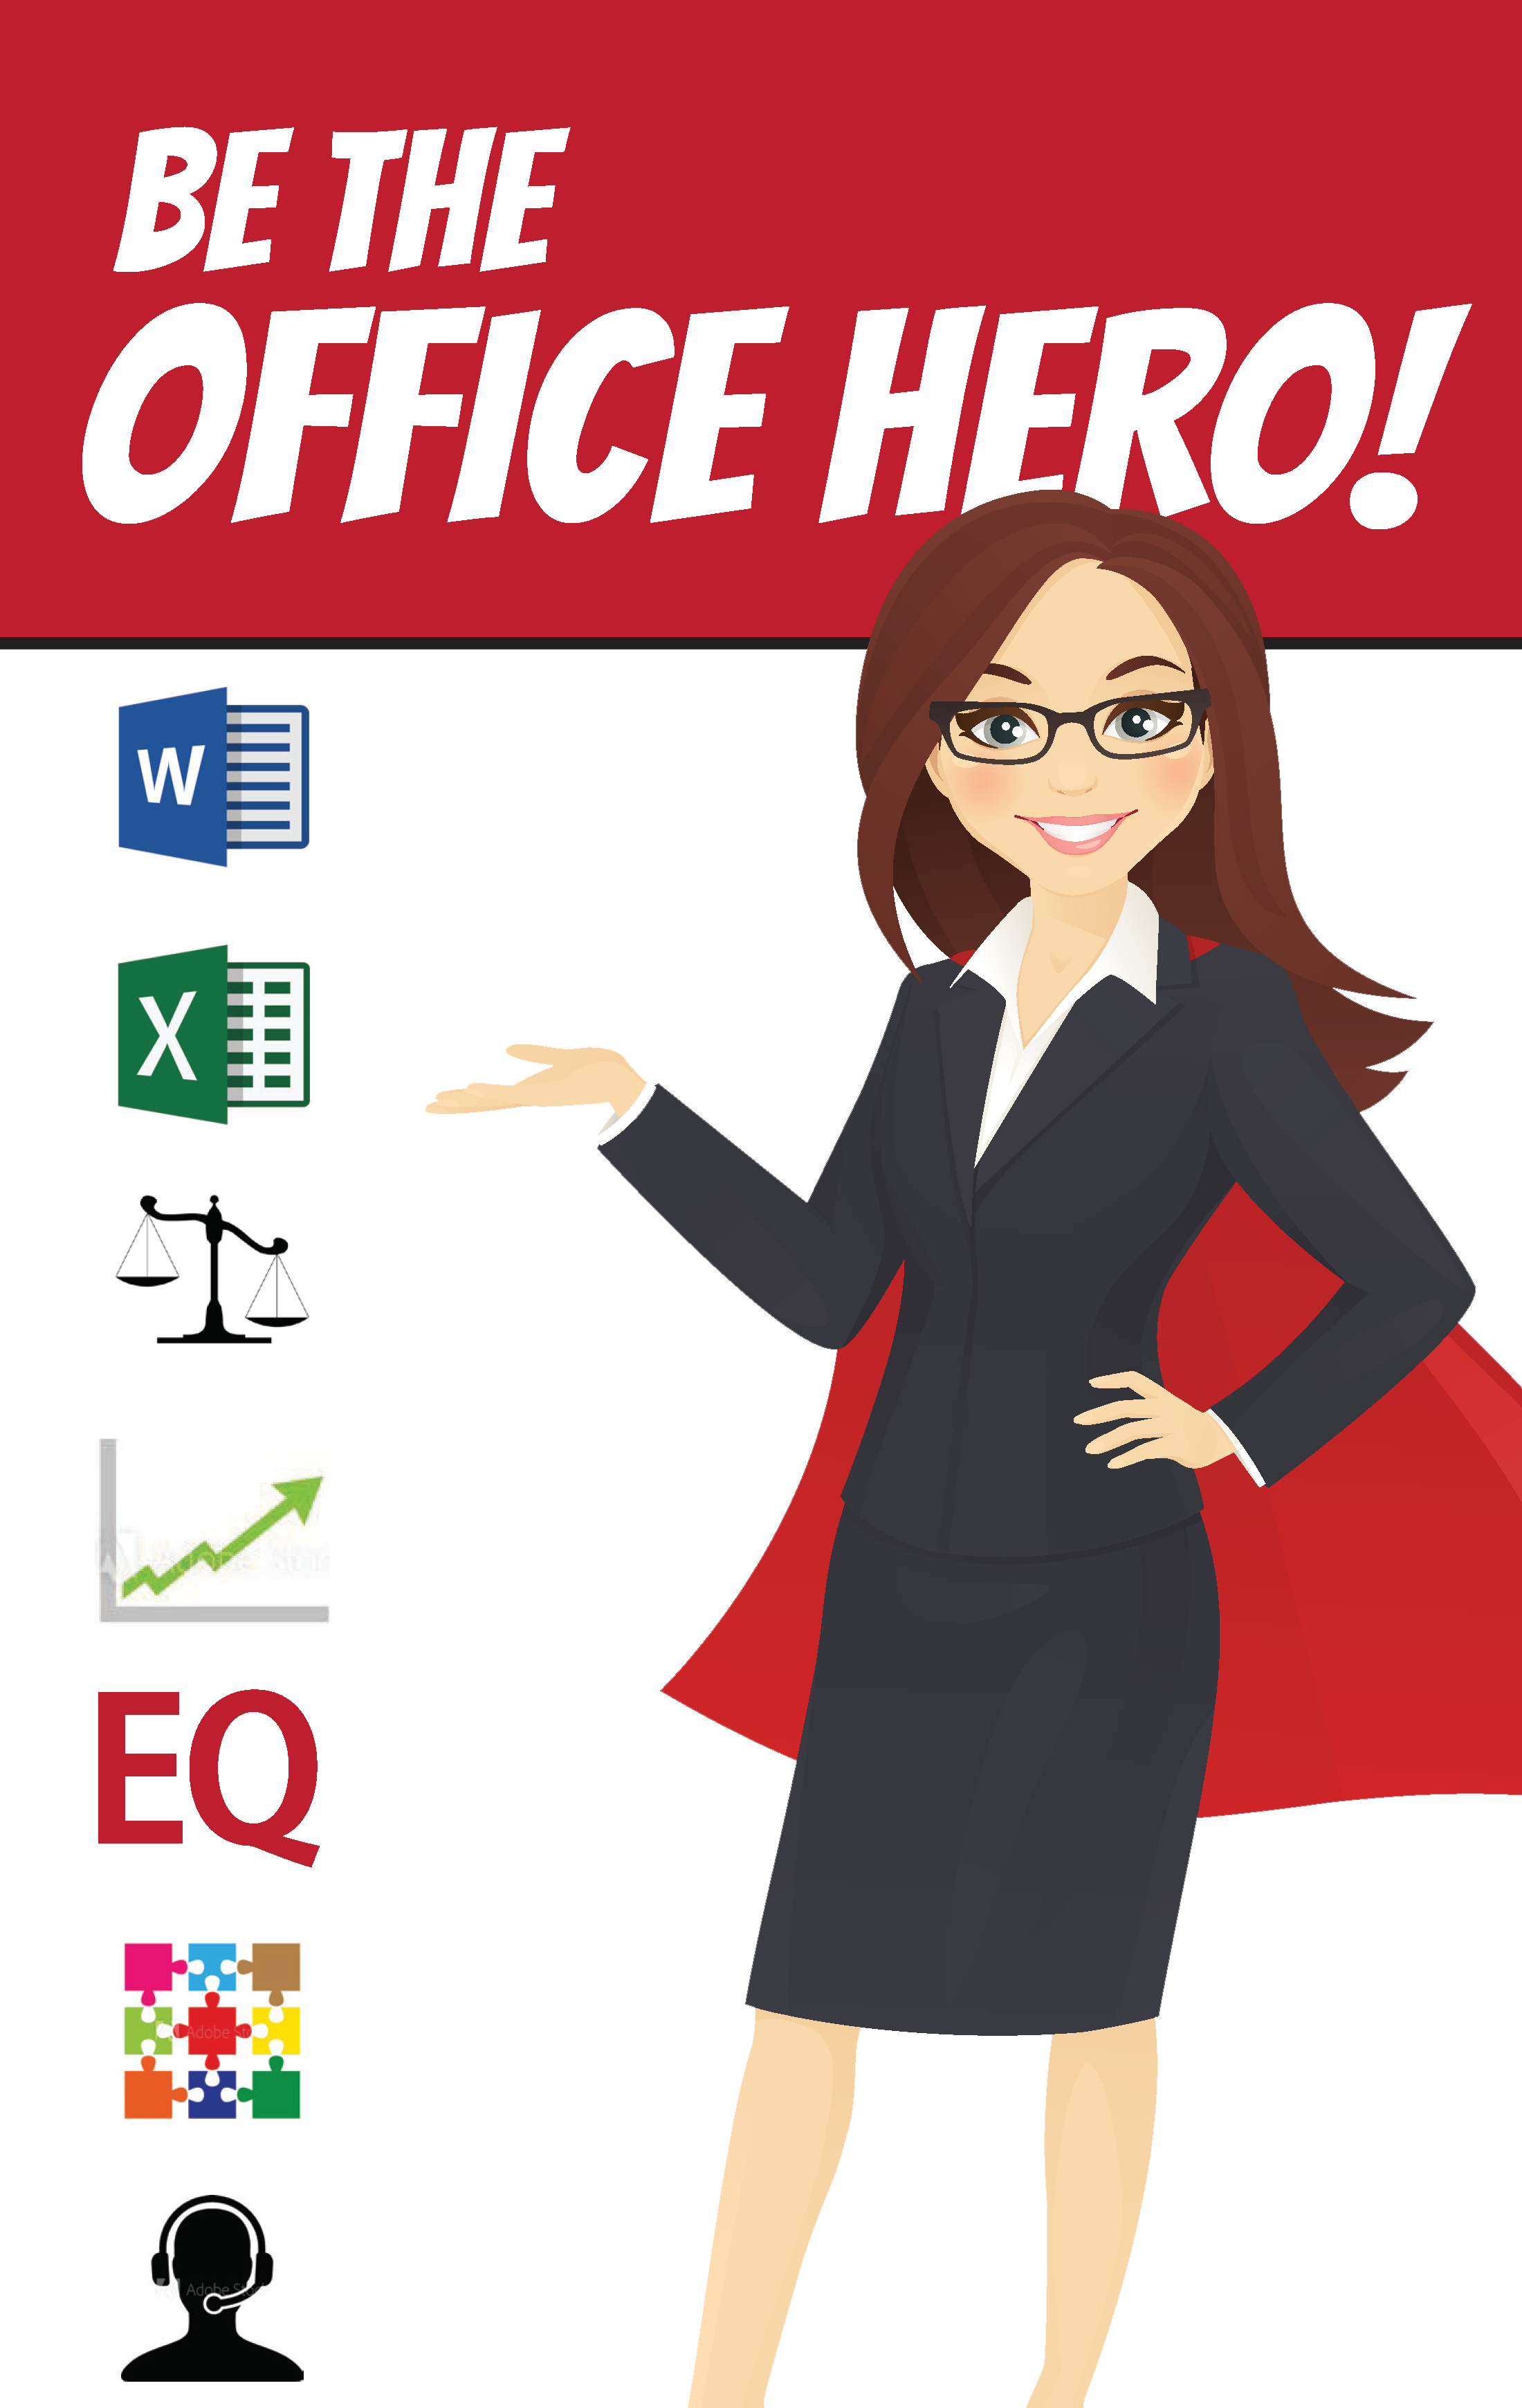 Be the office Hero!